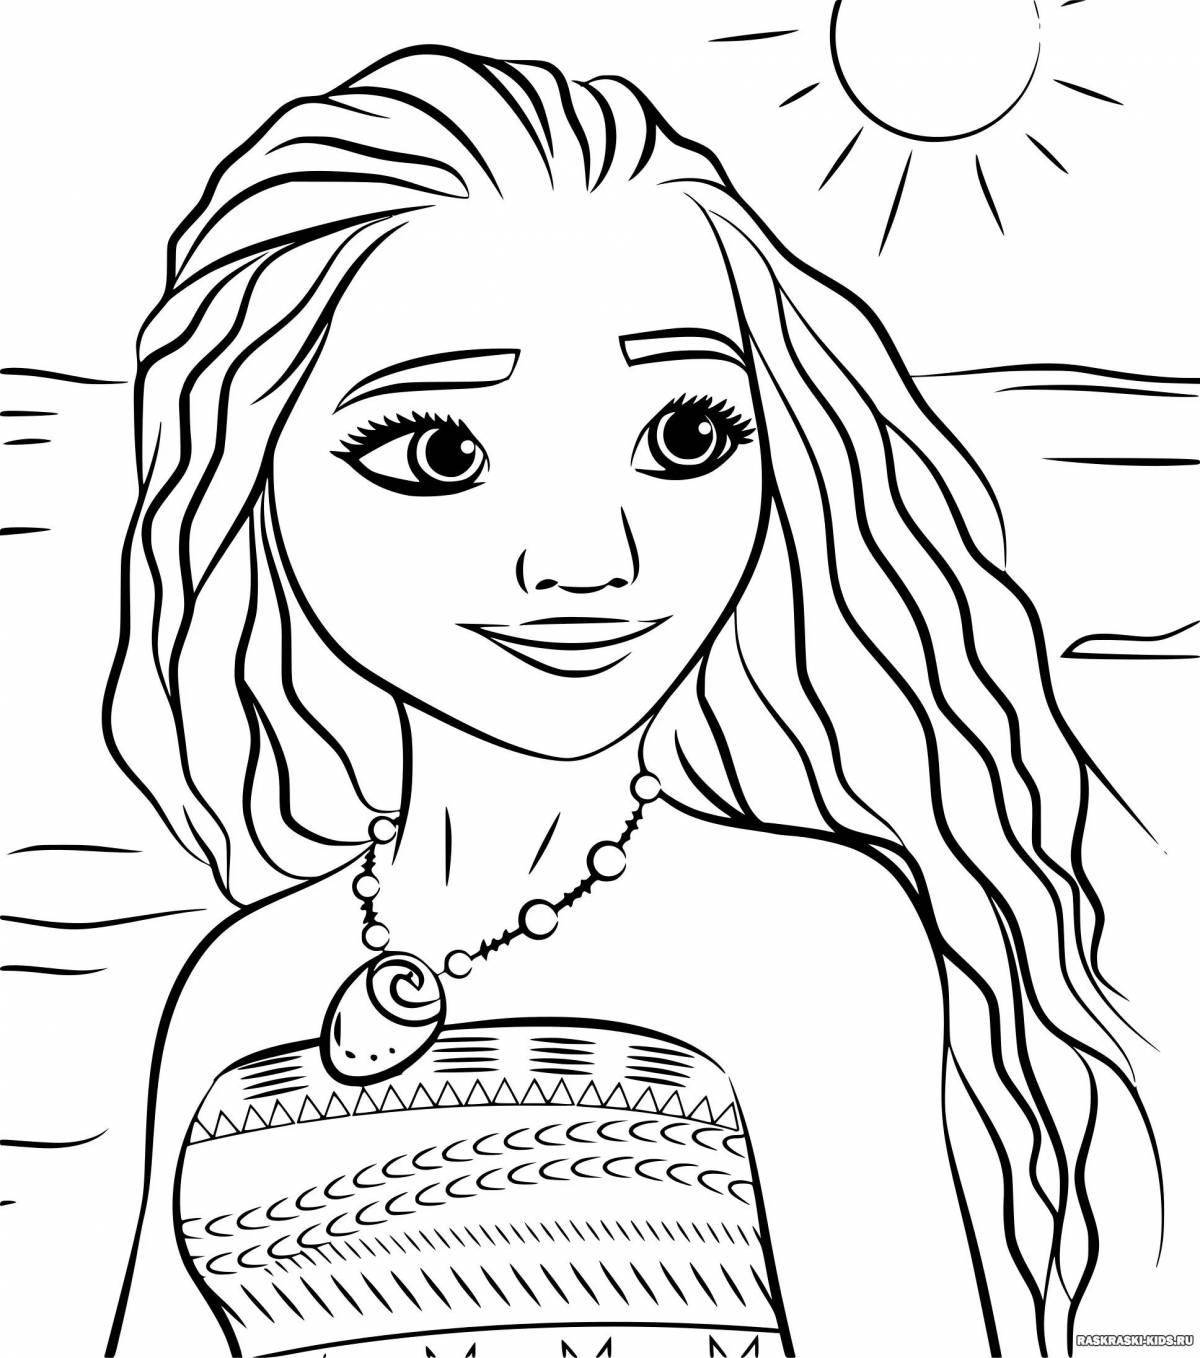 Amazing coloring pages for girls 9